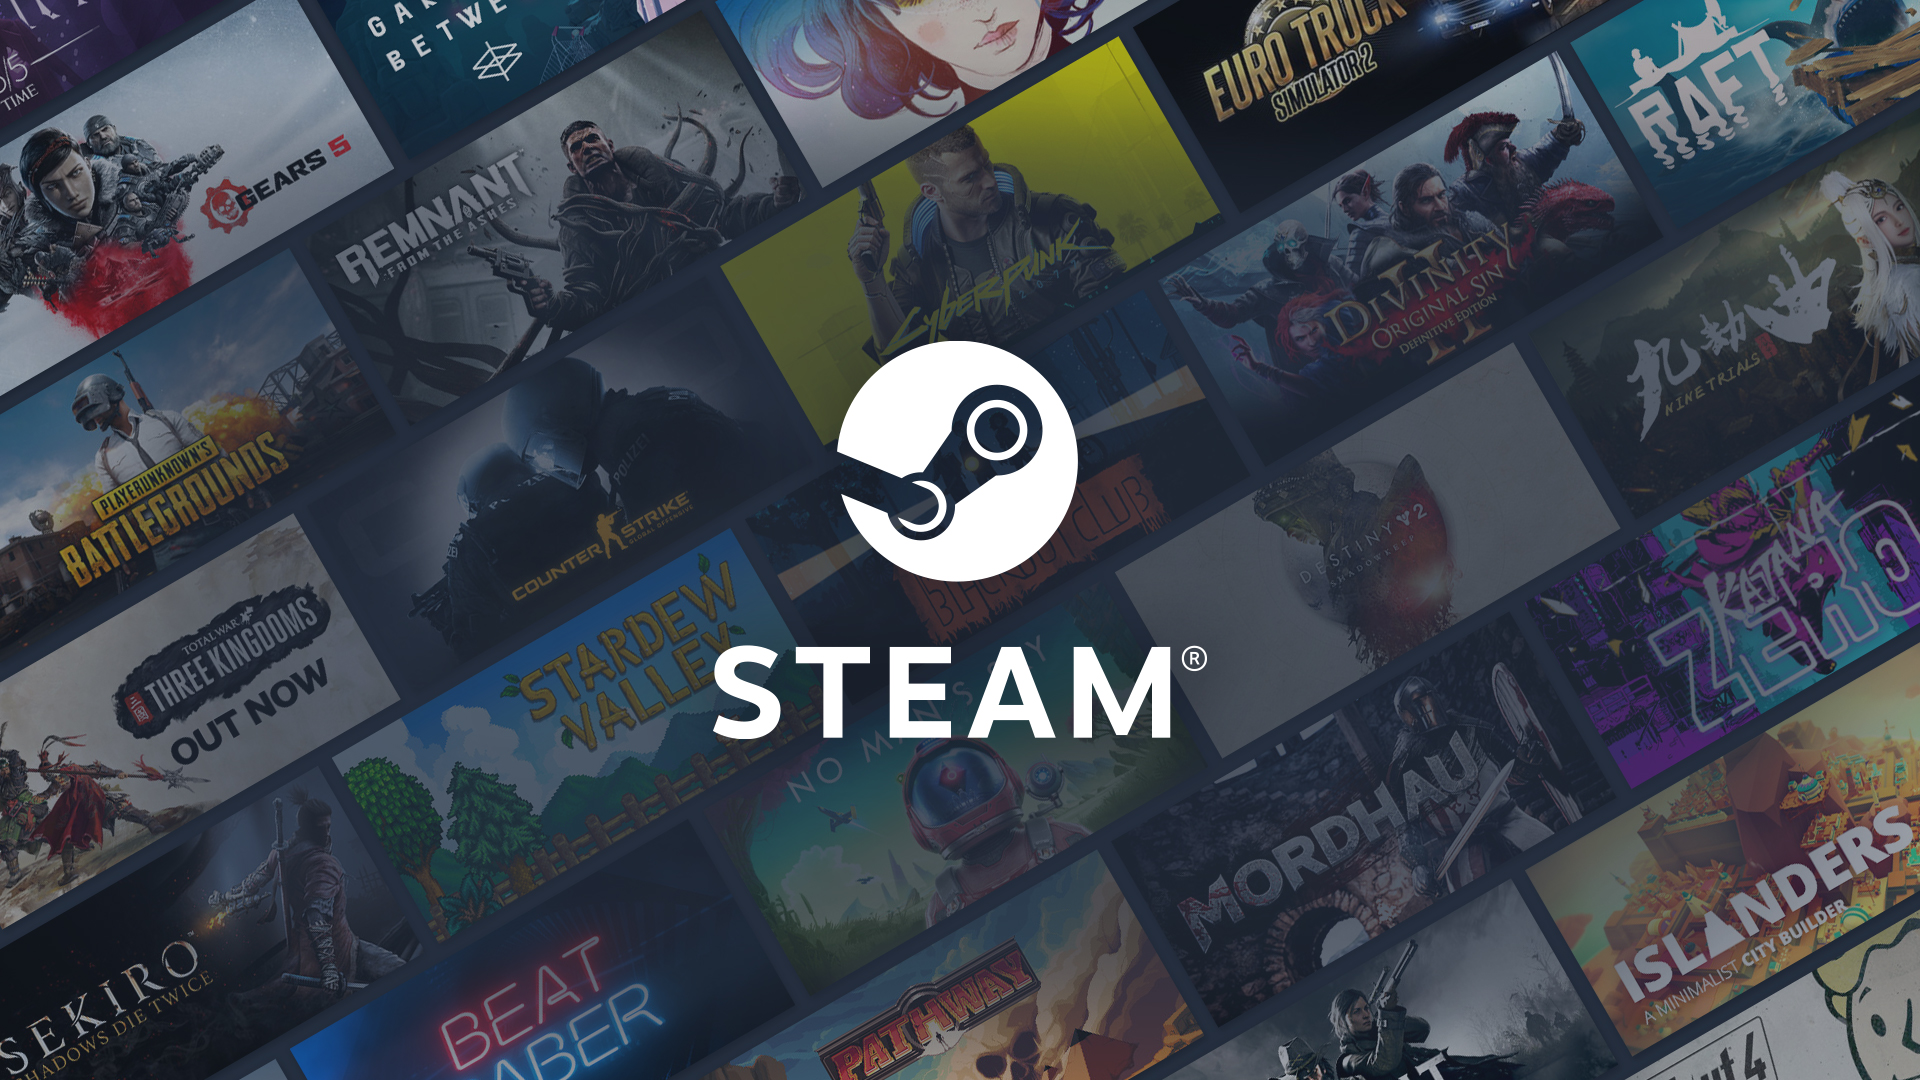 How To Make Steam Download Games Faster